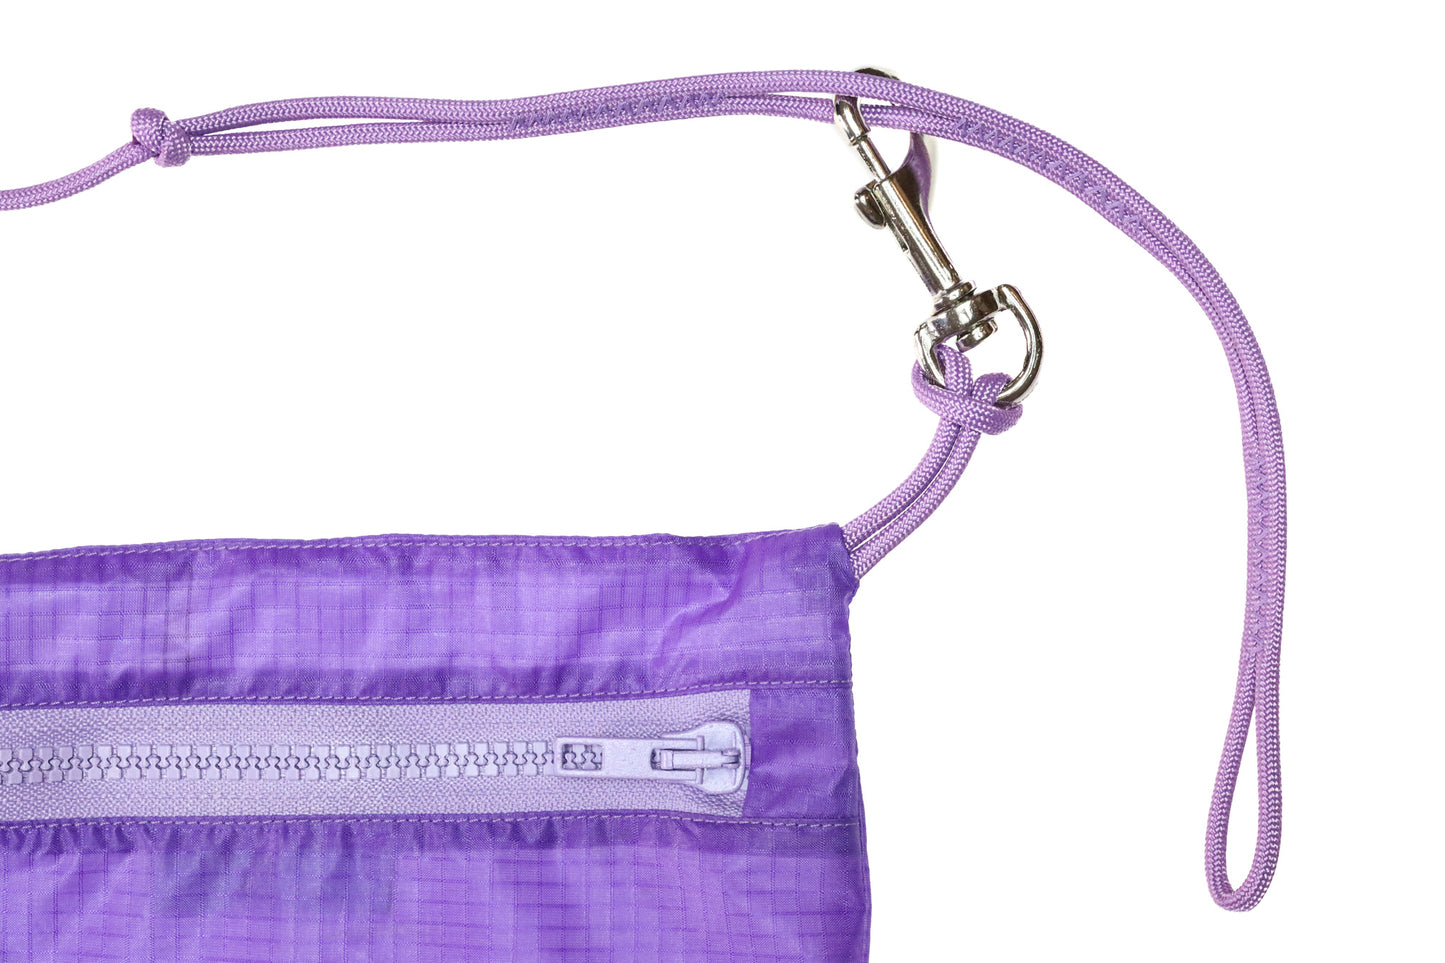 close up Flat lay crossbody bag in lavender made from recycled rip stop nylon